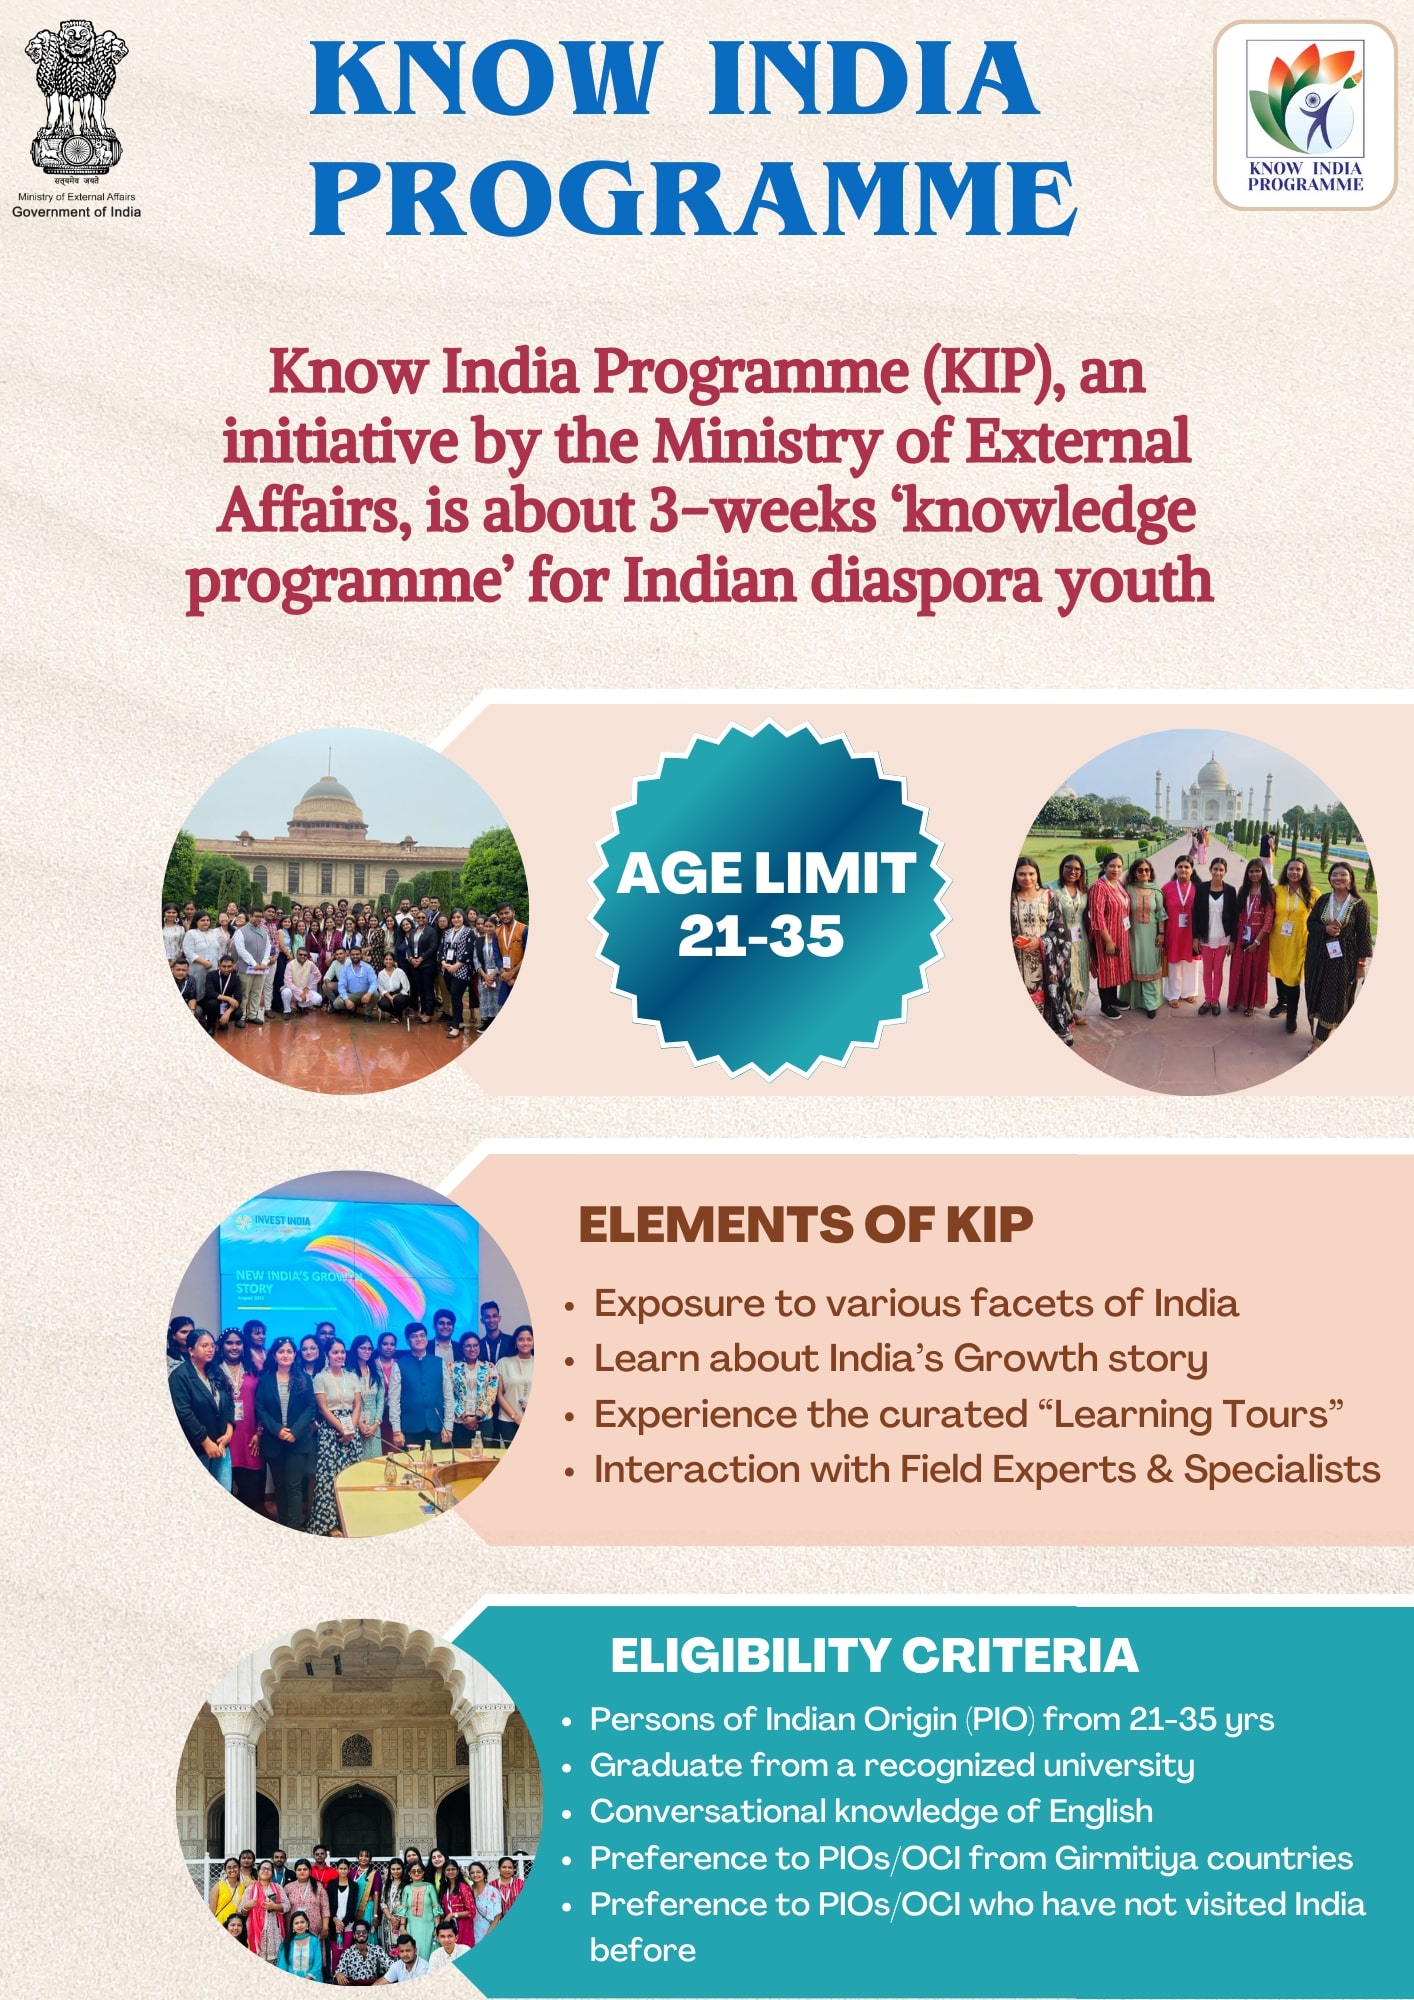 Indian Embassy Invited Applications of Know India Programme 2023